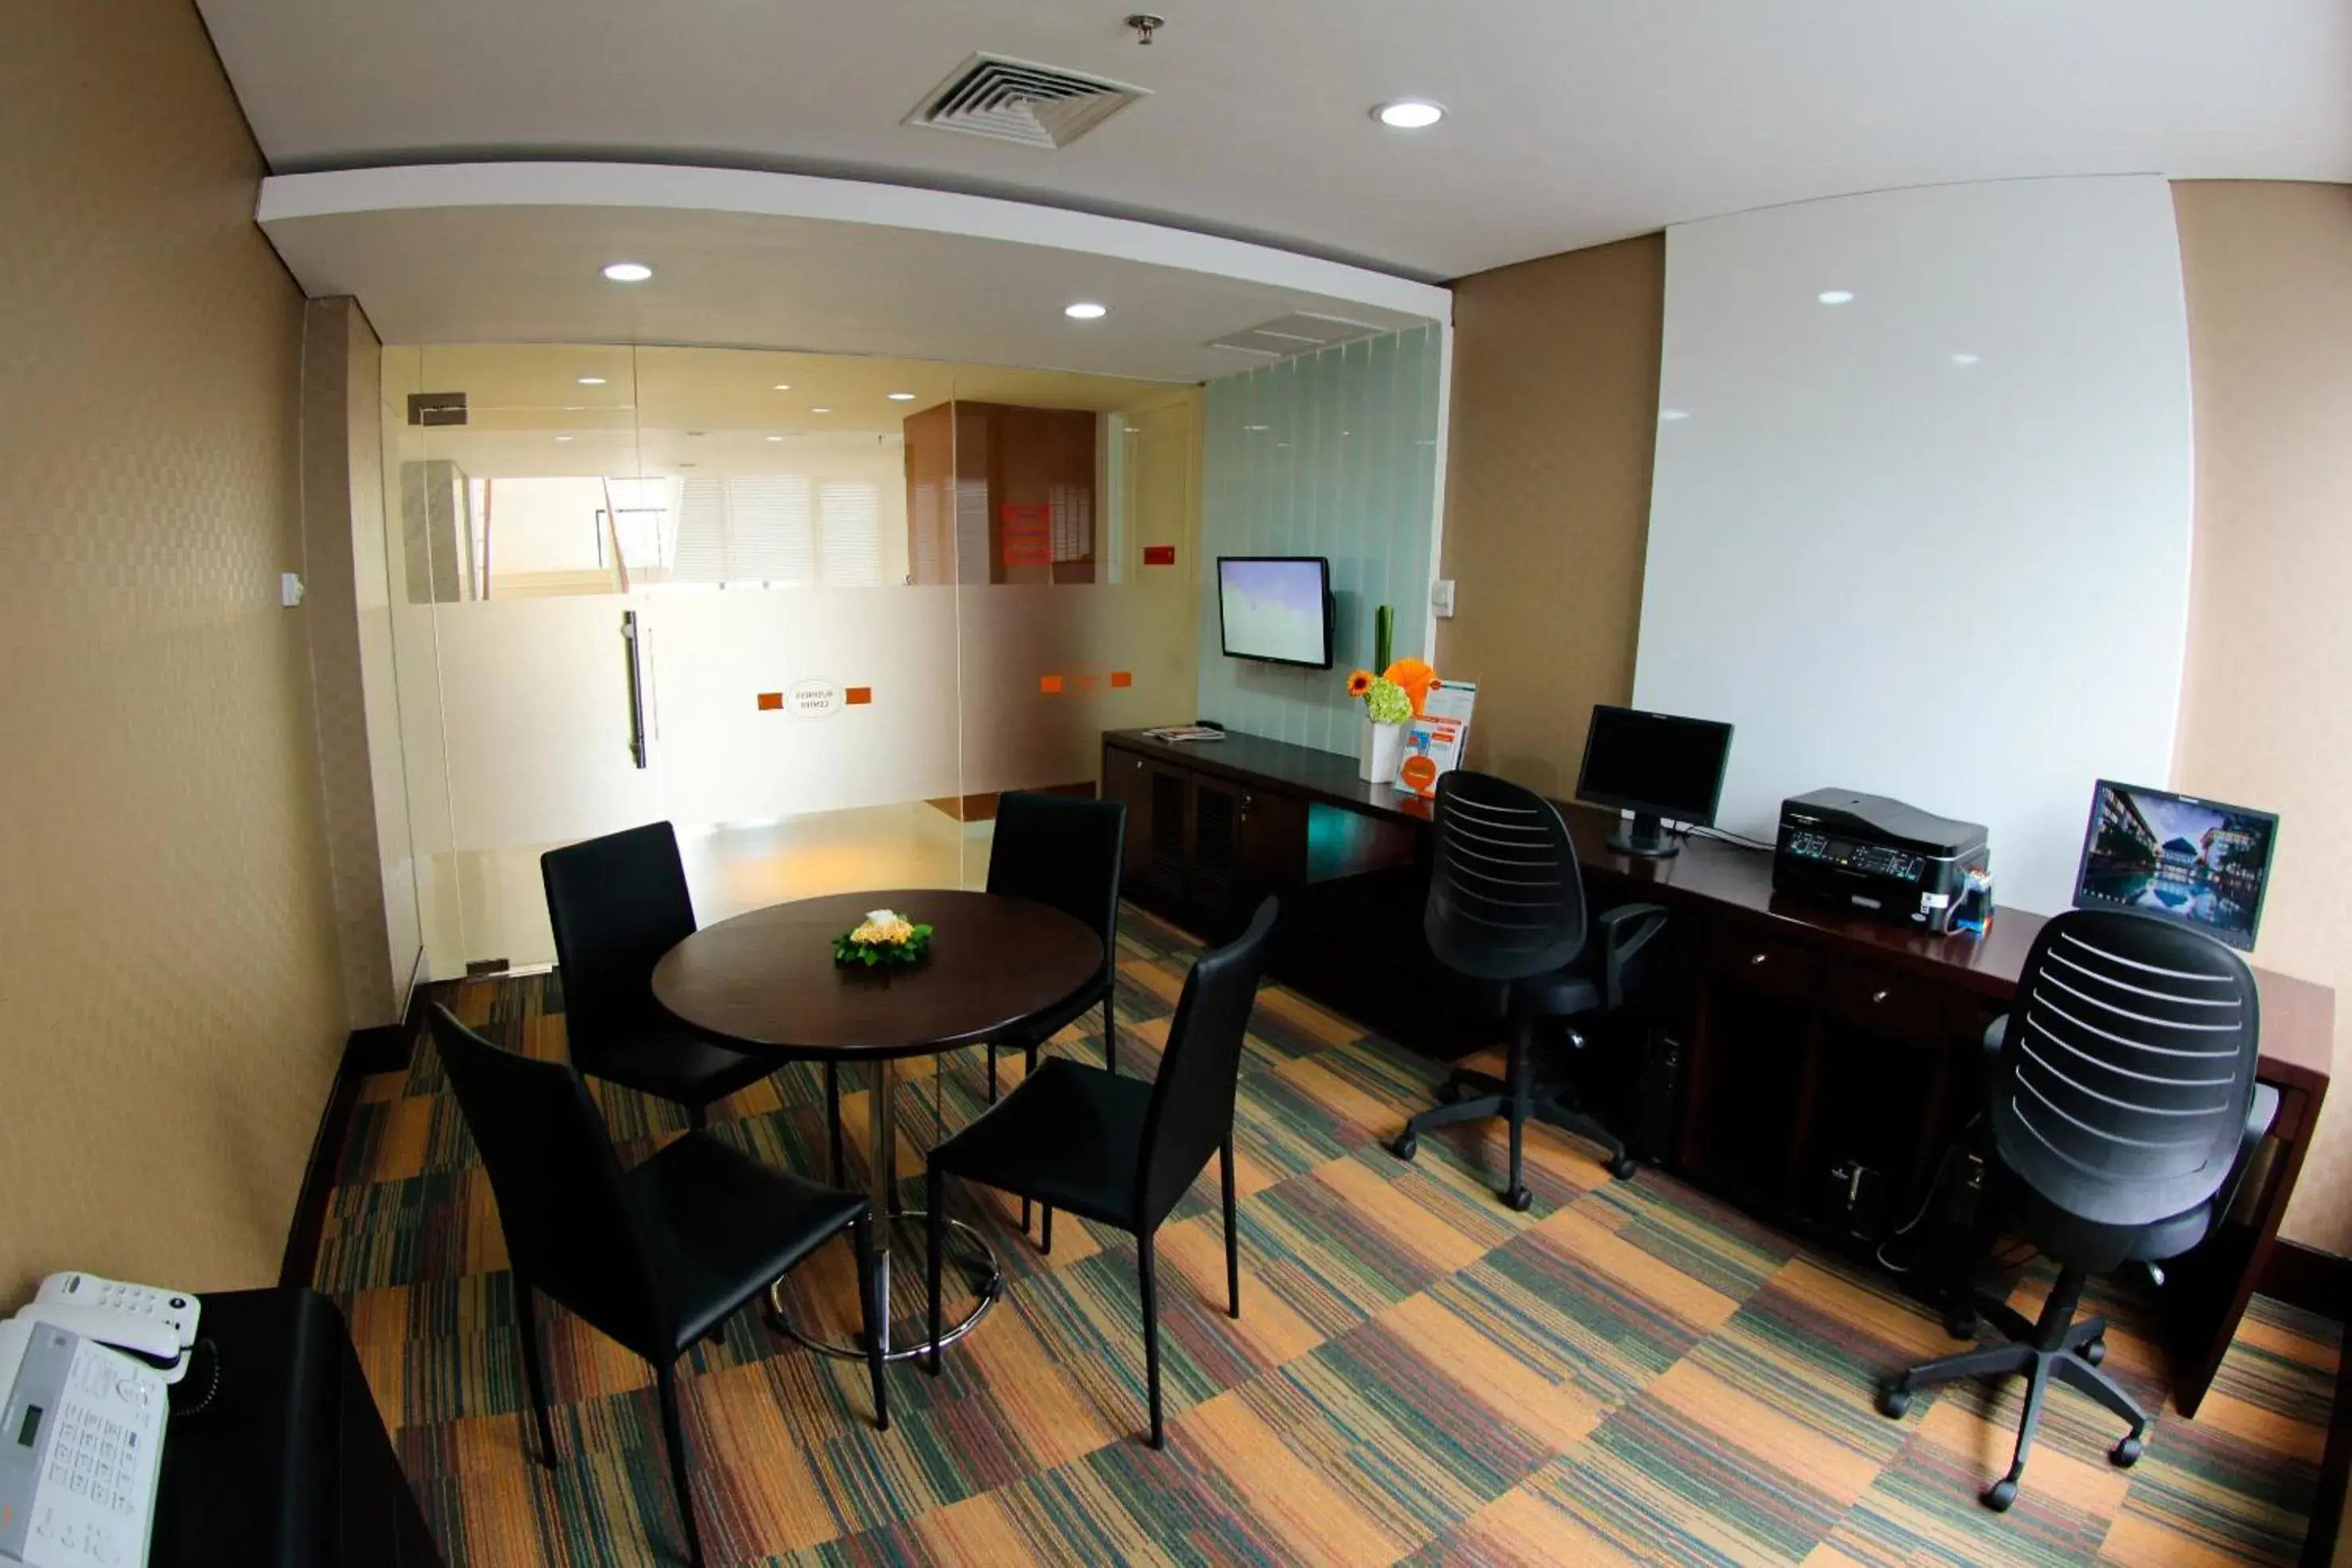 Business facilities in Harris Hotel & Conventions Malang